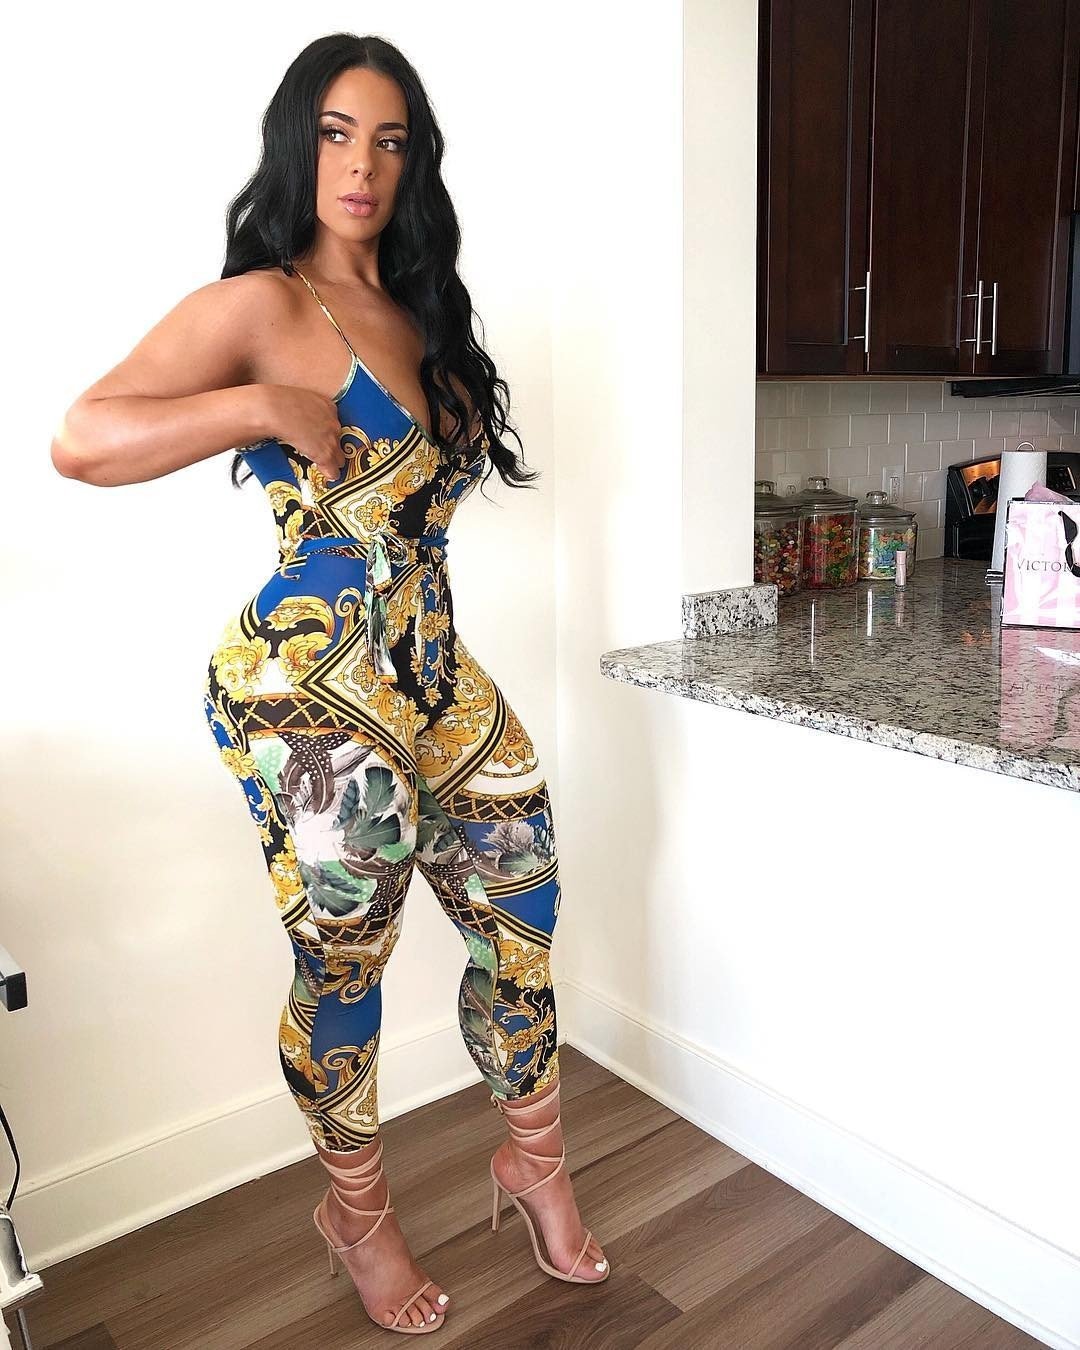 Watch the Photo by BIGCOOP4EVER with the username @BIGCOOP4EVER, posted on January 4, 2019 and the text says 'ecstasymodels:

Gemma (@gemstar) “⚜️ #Ootn • Jumpsuit by @seldafashionboutique | DC: gemstar to save 15%”⁣ .⁣ .⁣ .⁣ .⁣ #ecstasymodels #blackfashion #ootd⁣ #blvckfashion #streetwearfashion #fashionporn #outfitoftheday #lookoftheday #pyrexvision..'